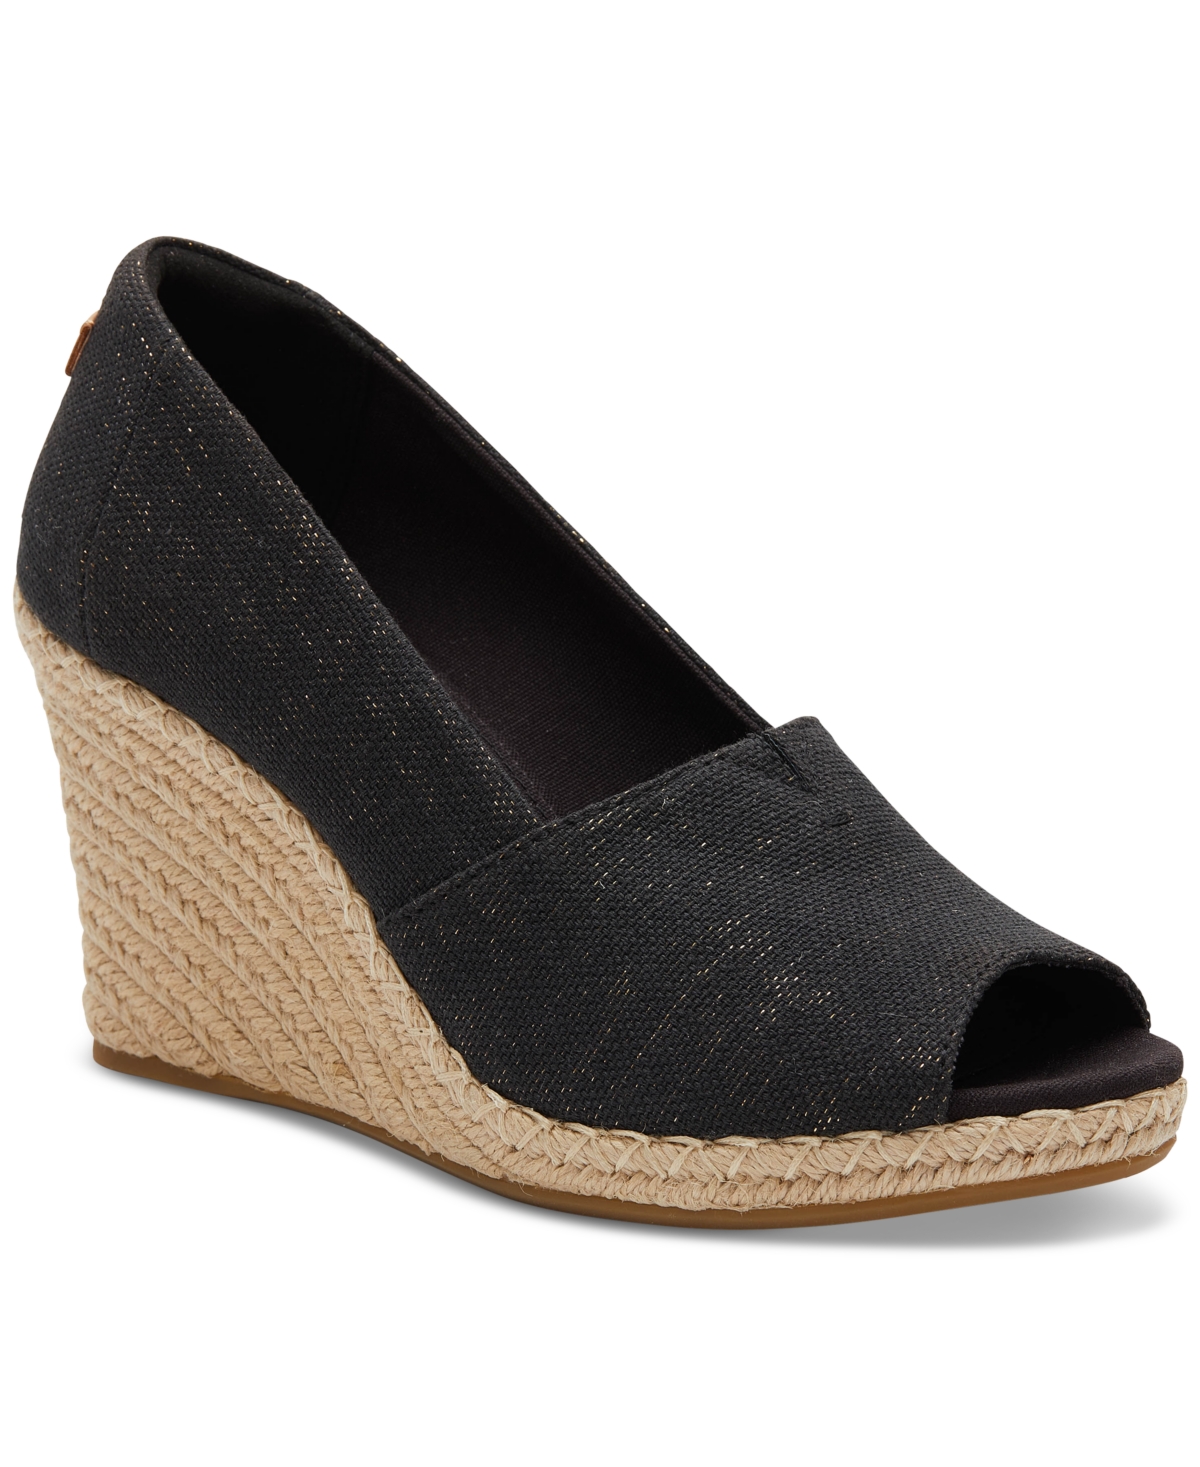 Toms Women's Michelle Recycled Peep-toe Espadrille Wedges Women's Shoes In Black